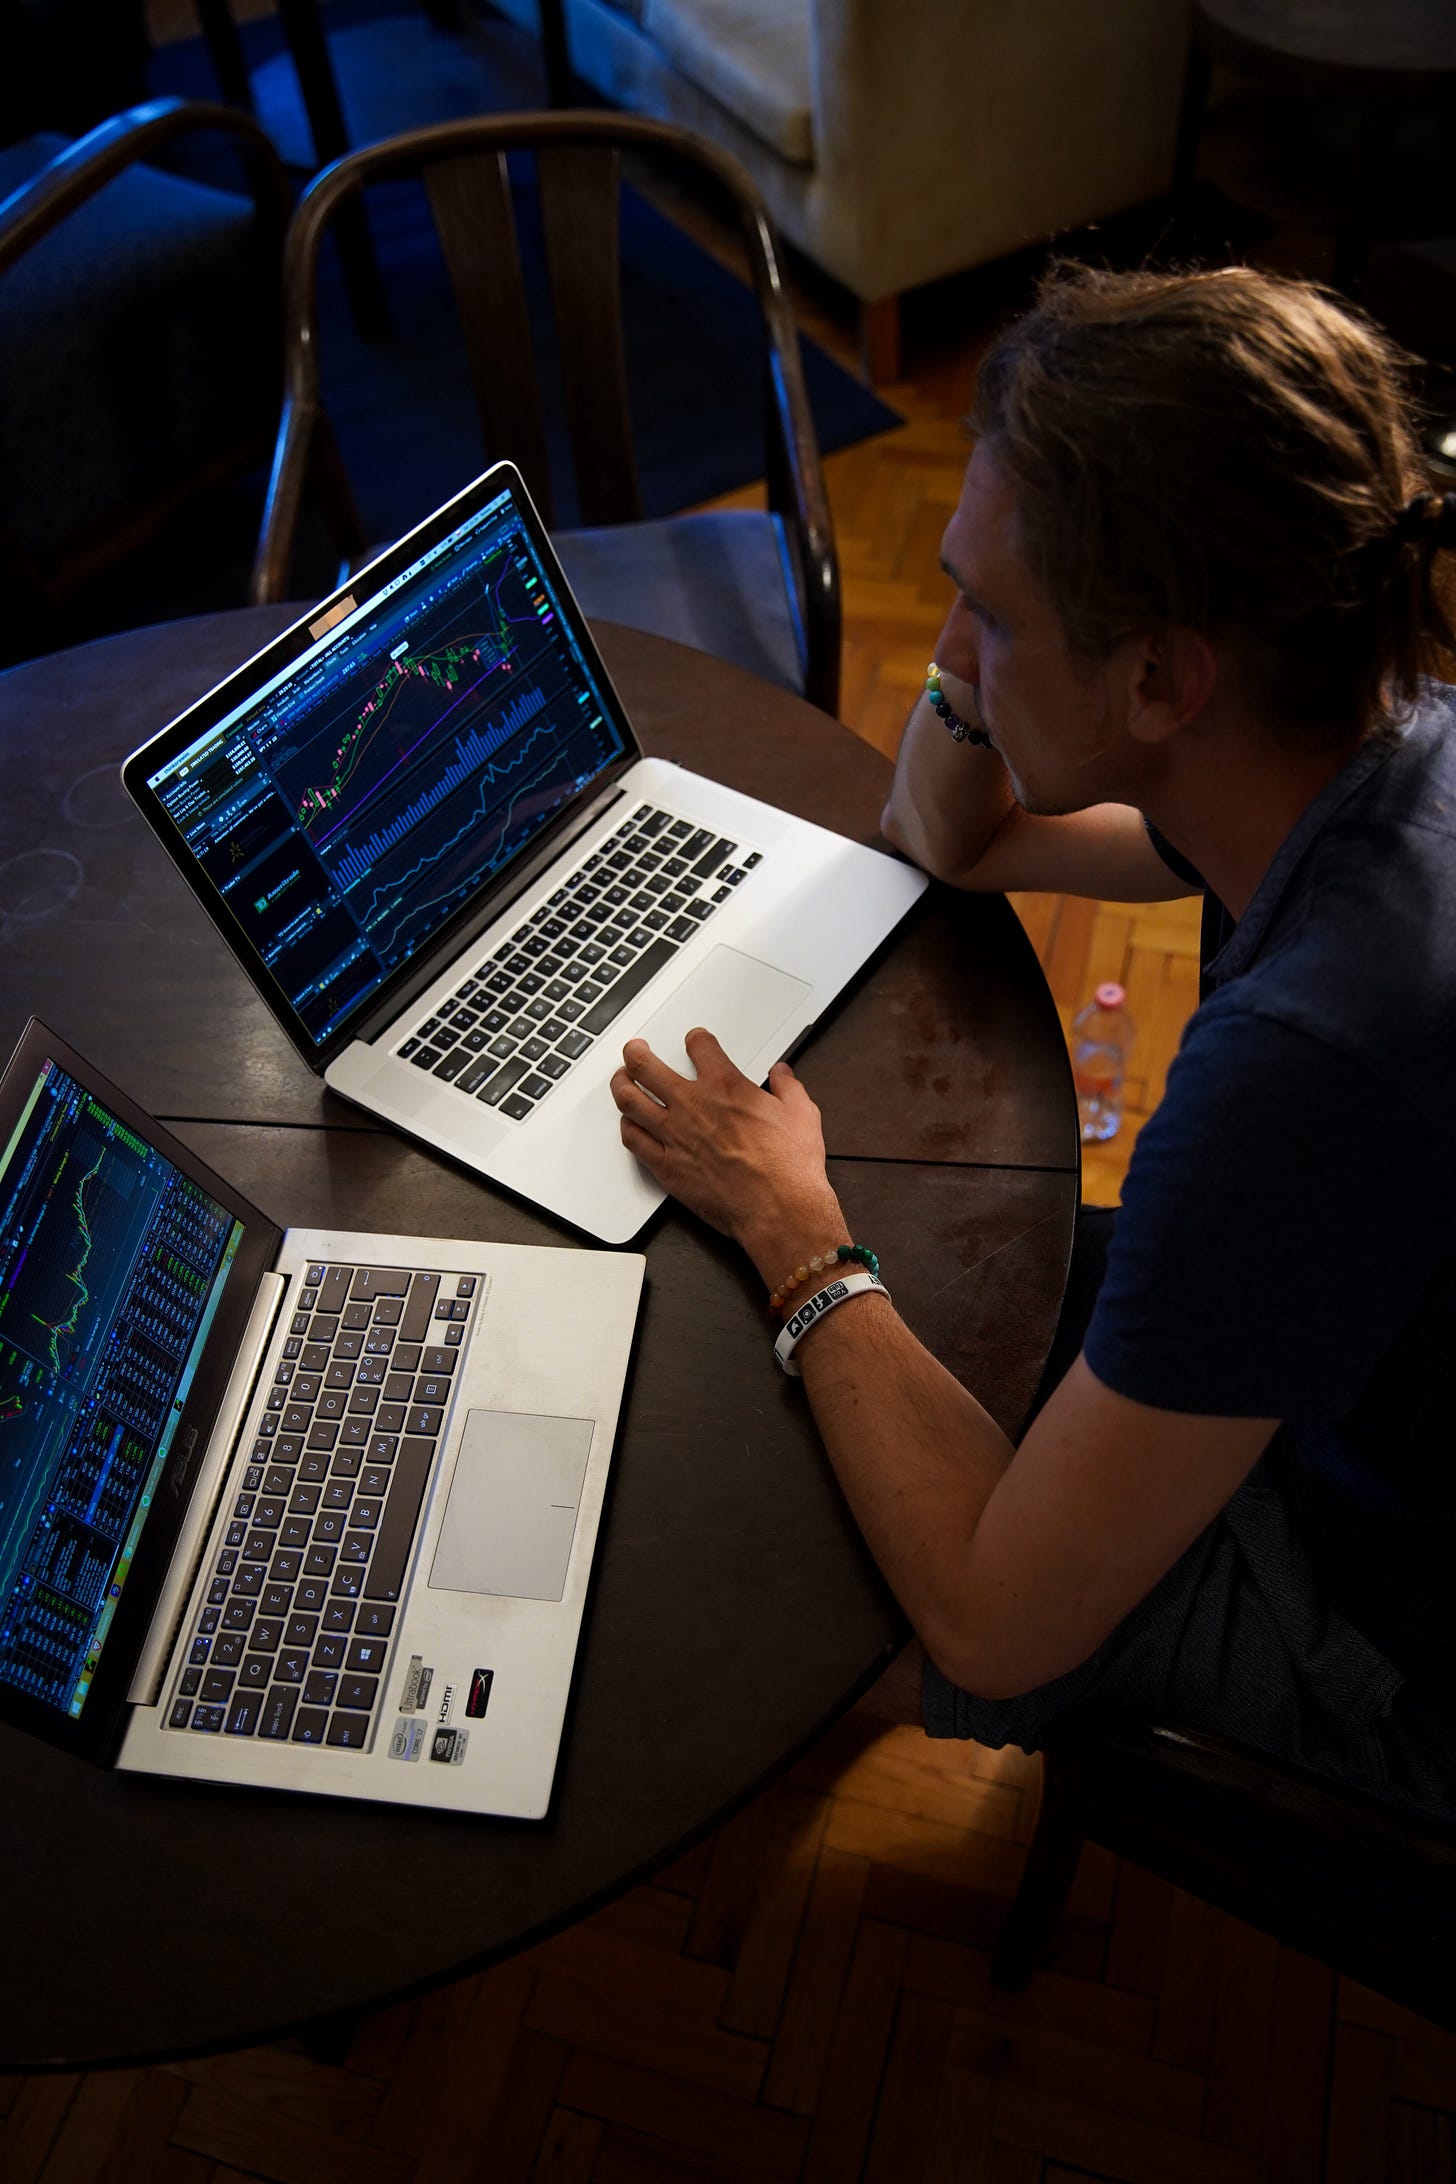 A man sitting in front of two laptops with stock charts and market data open. He’s browsing different stocks on each of the laptops.